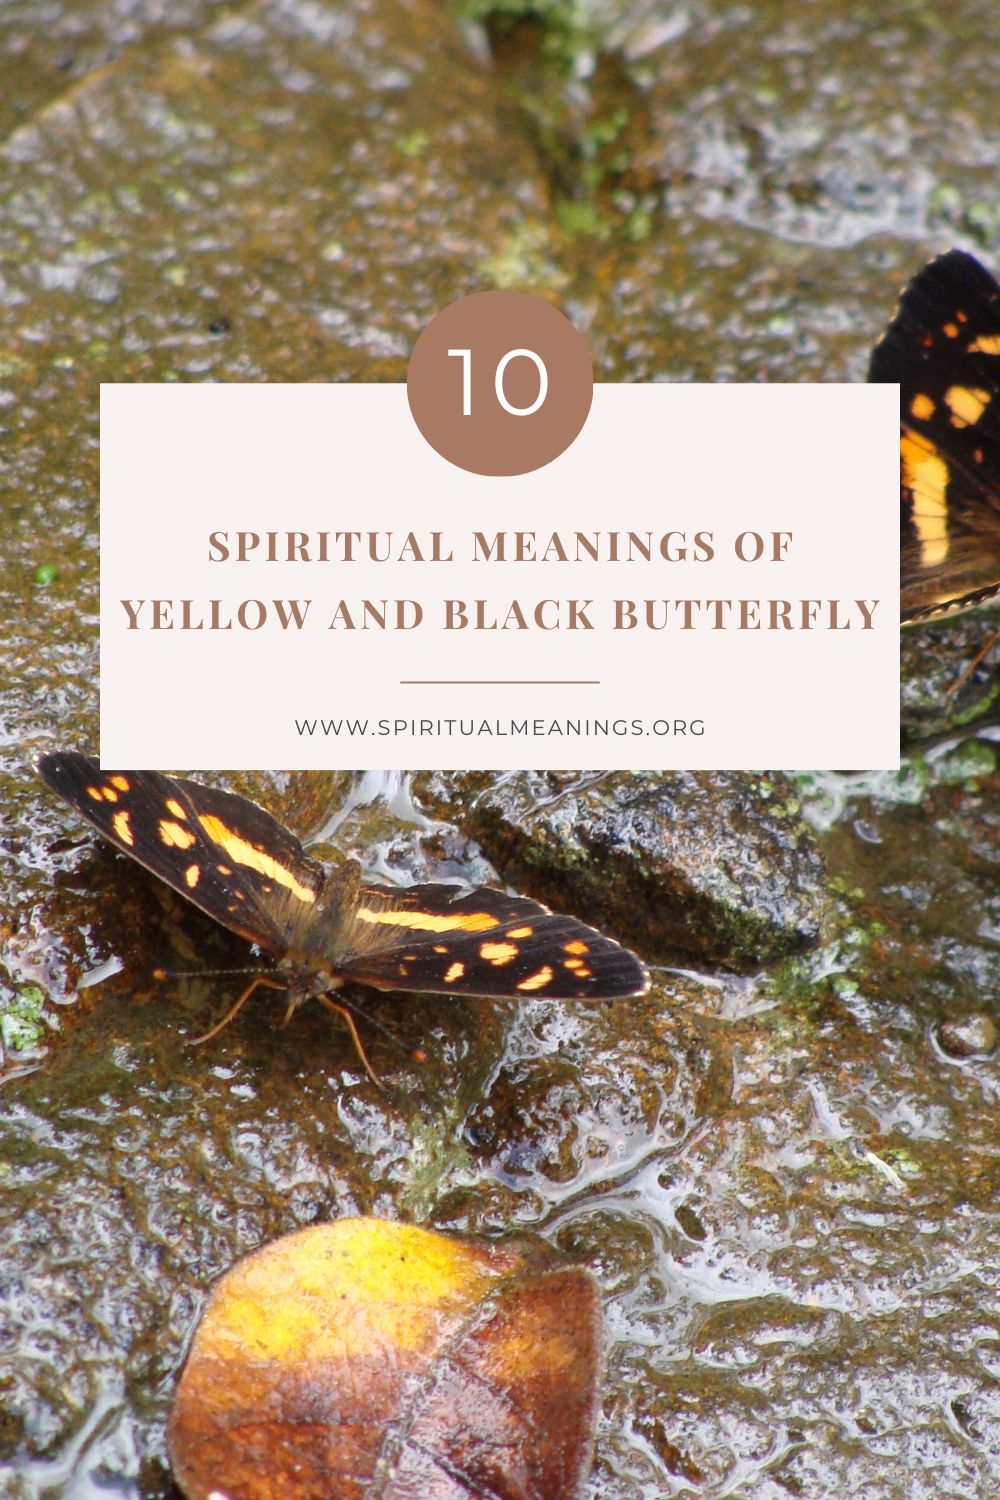 Many ways to interpret seeing a yellow and black butterfly